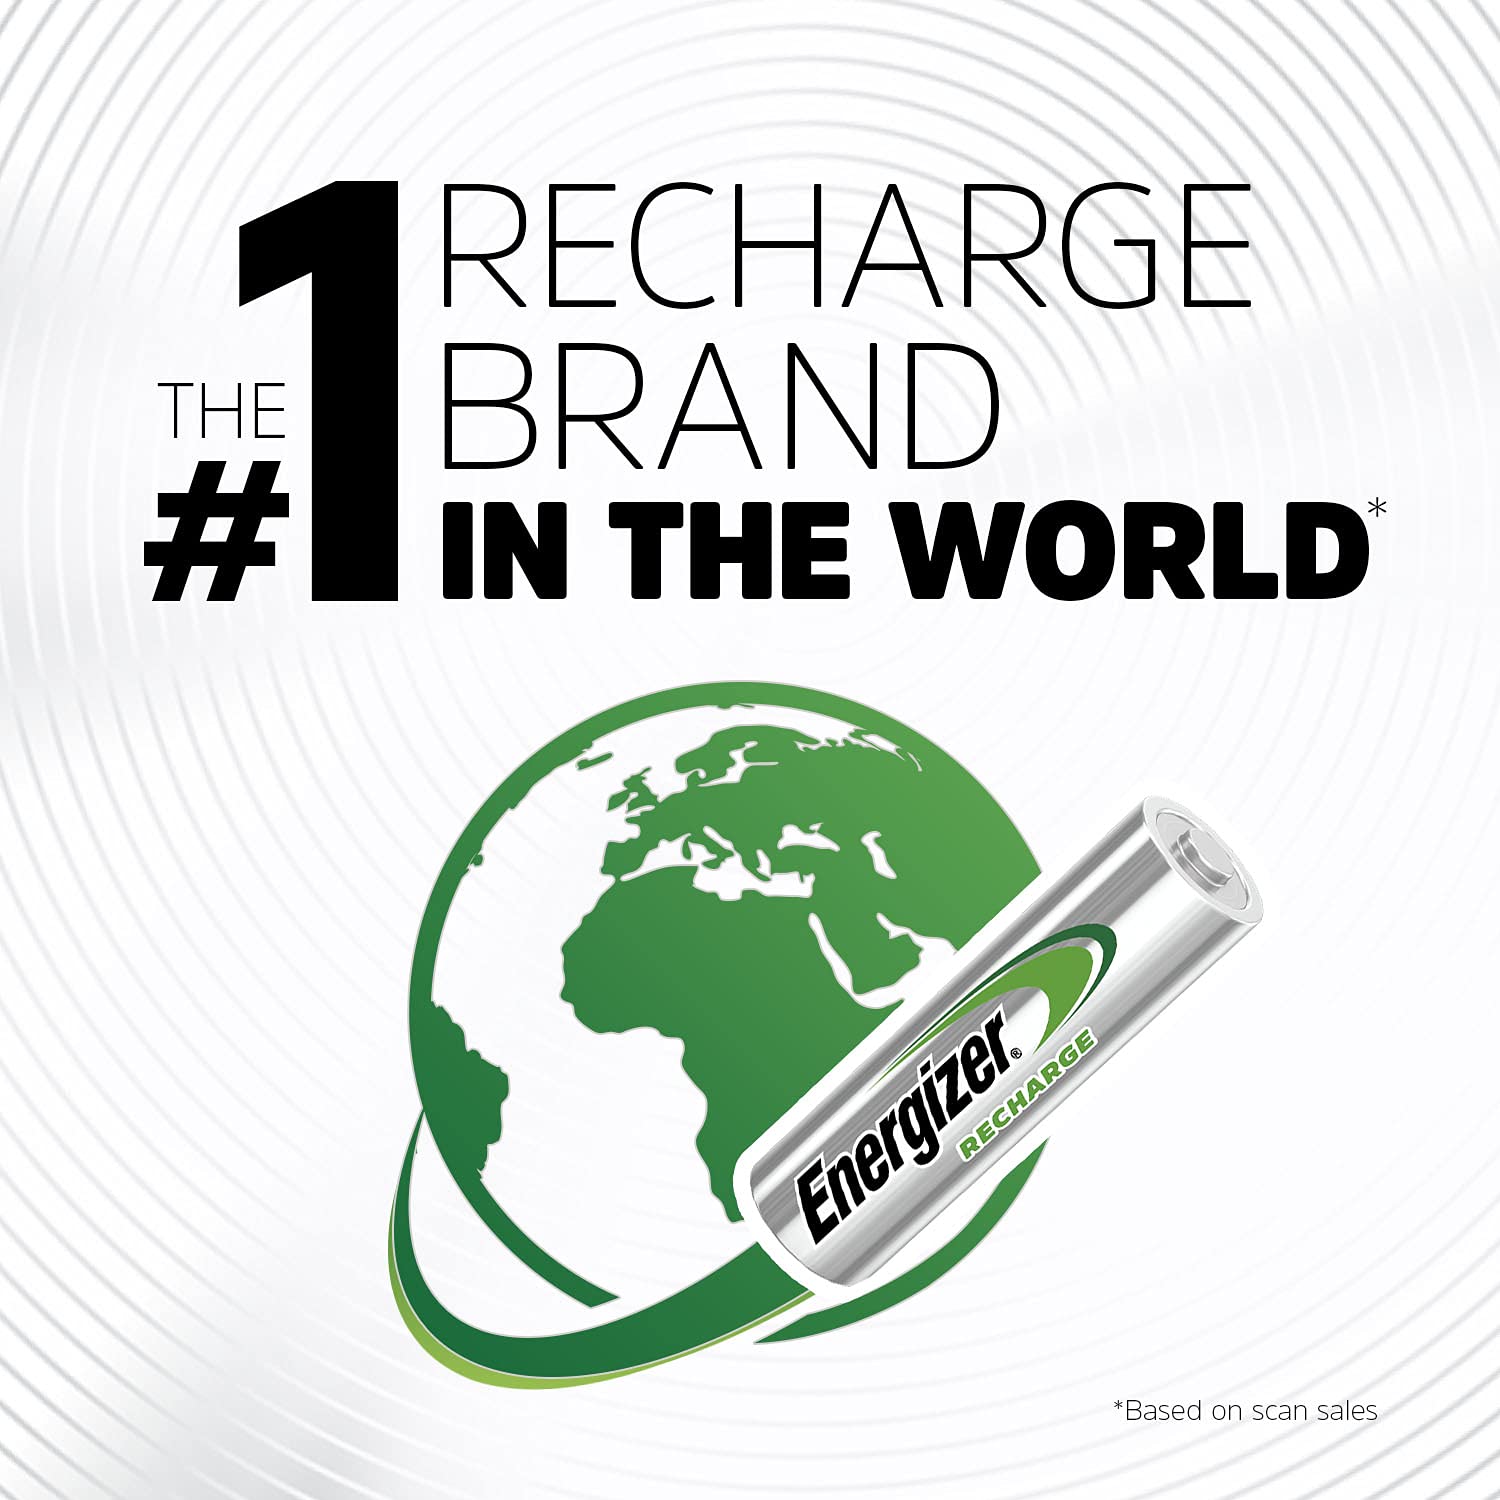 Energizer AA Batteries, Pre-Charged Double A Rechargeable Batteries, 2 Count